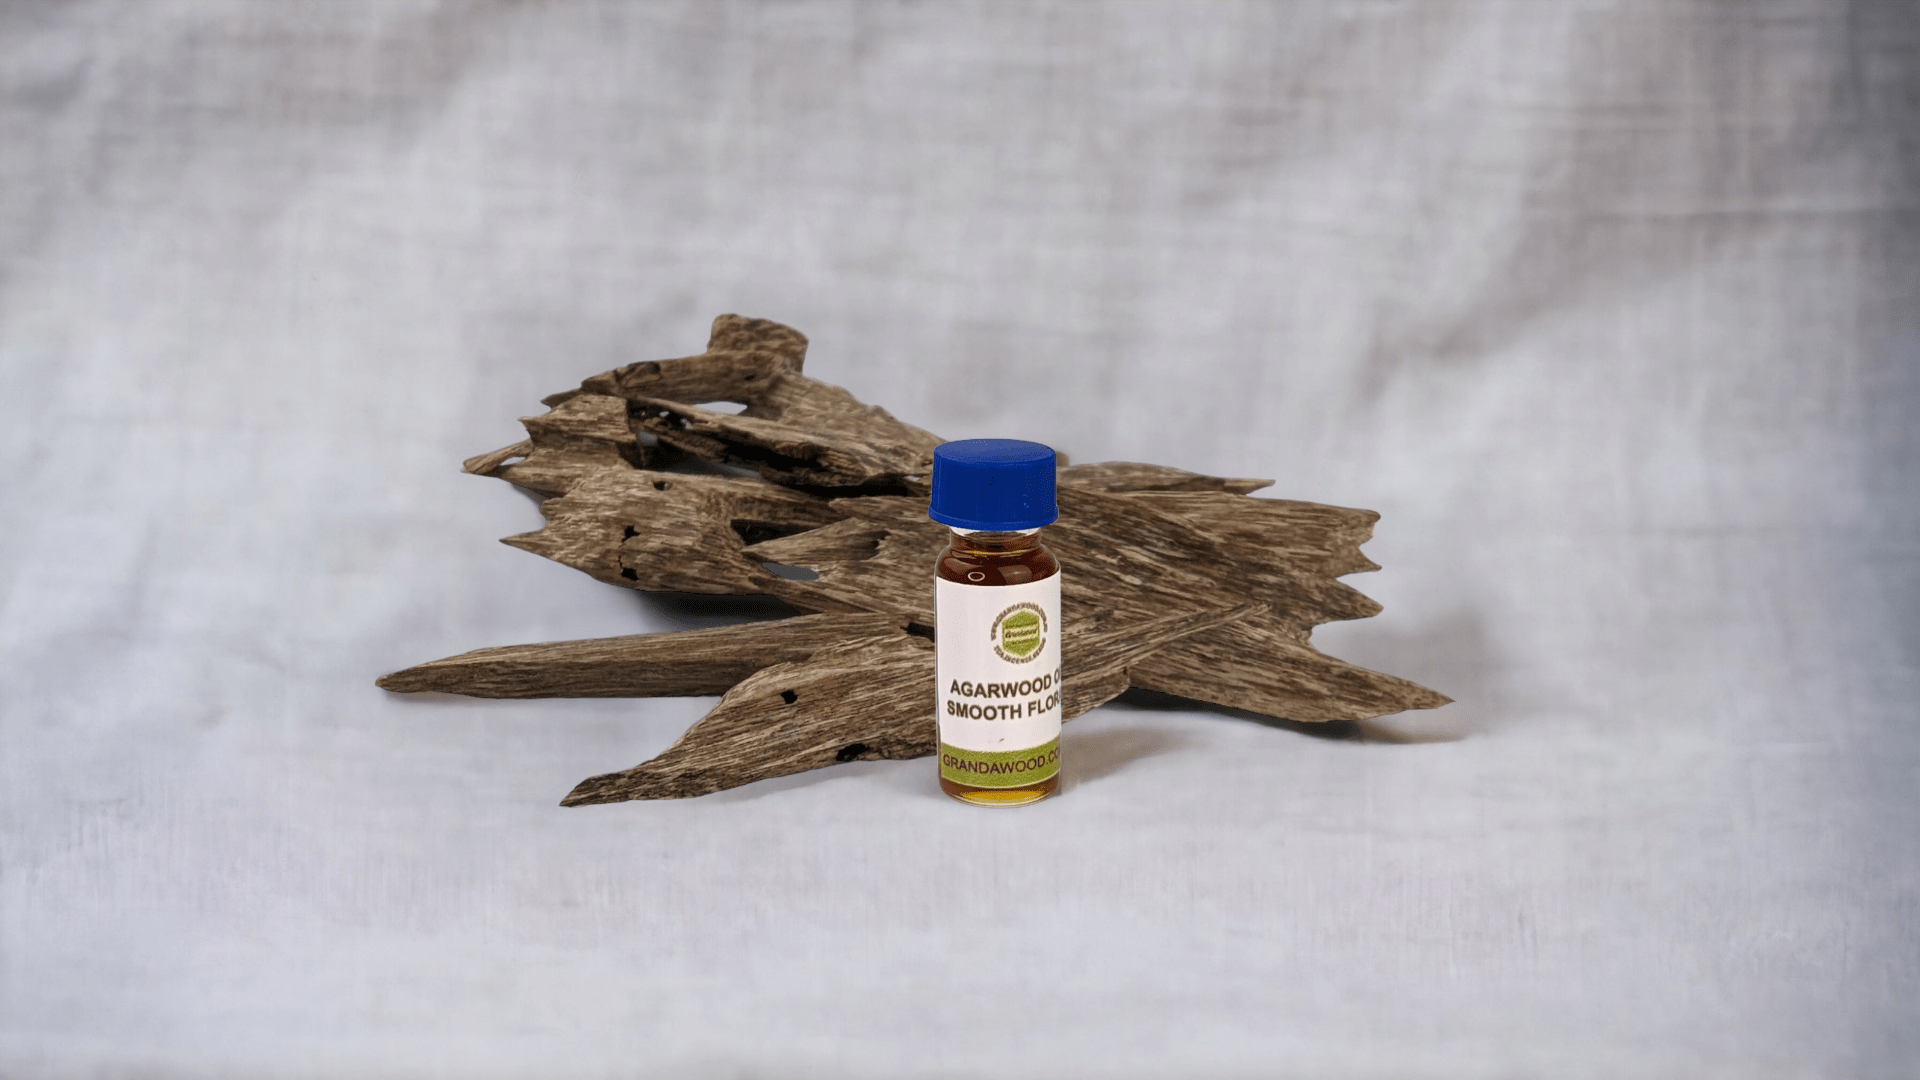 100% Pure Cultivated Agarwood Oil (Oud) Specialty- Super Smooth Floral Oud - 6ml